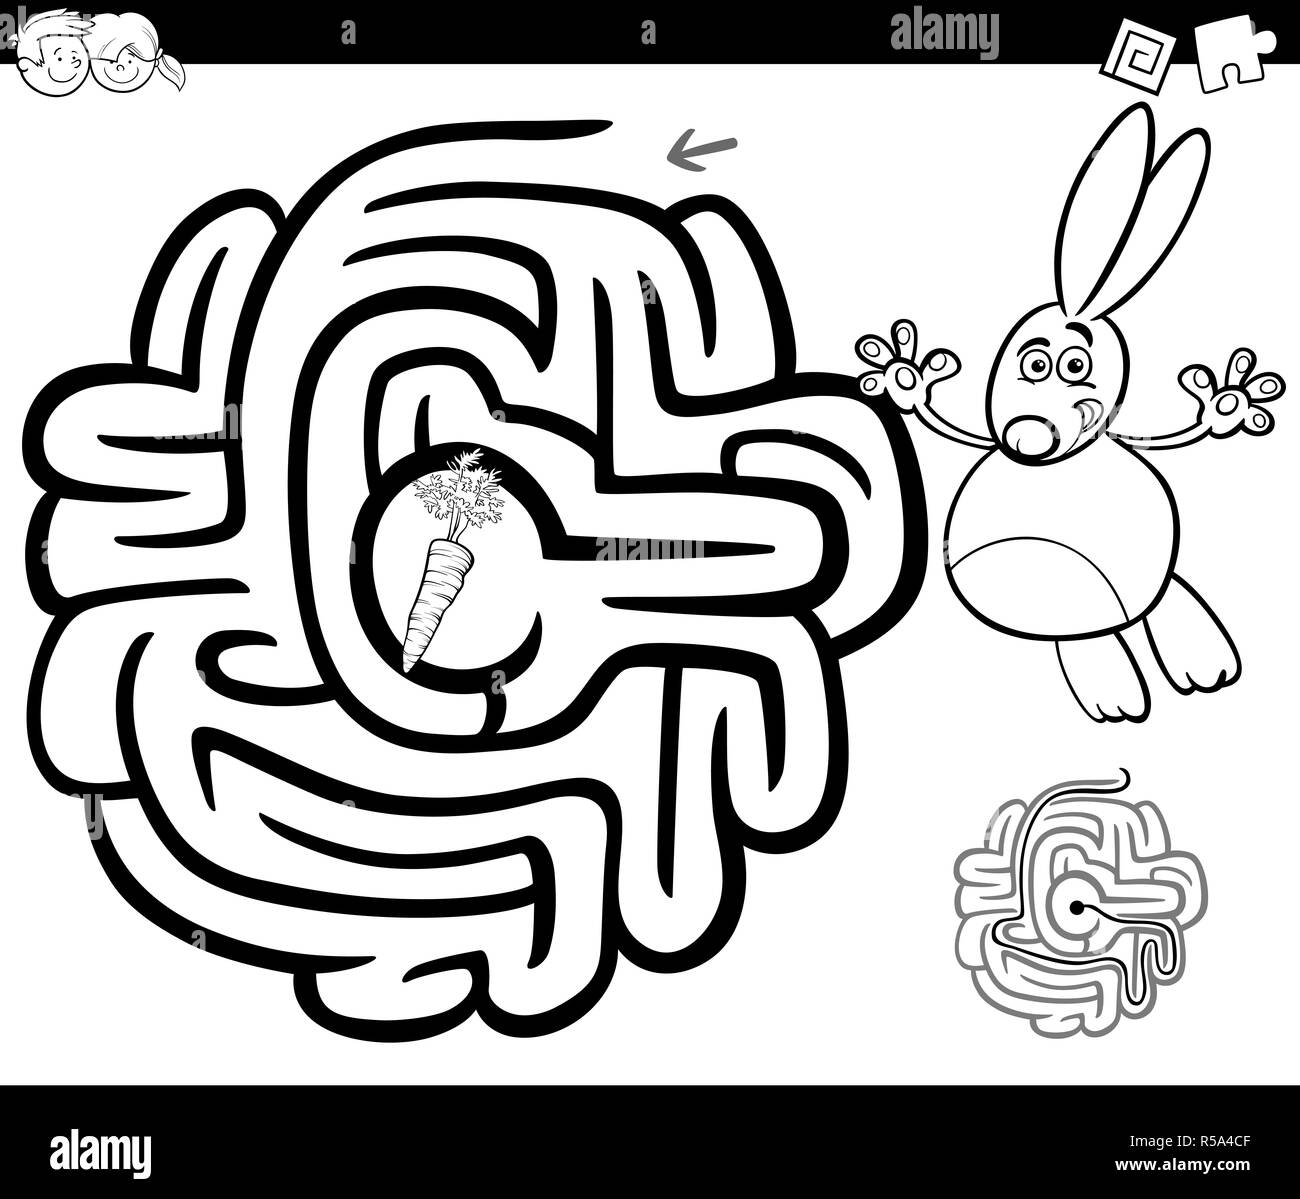 maze with rabbit coloring page Stock Photo